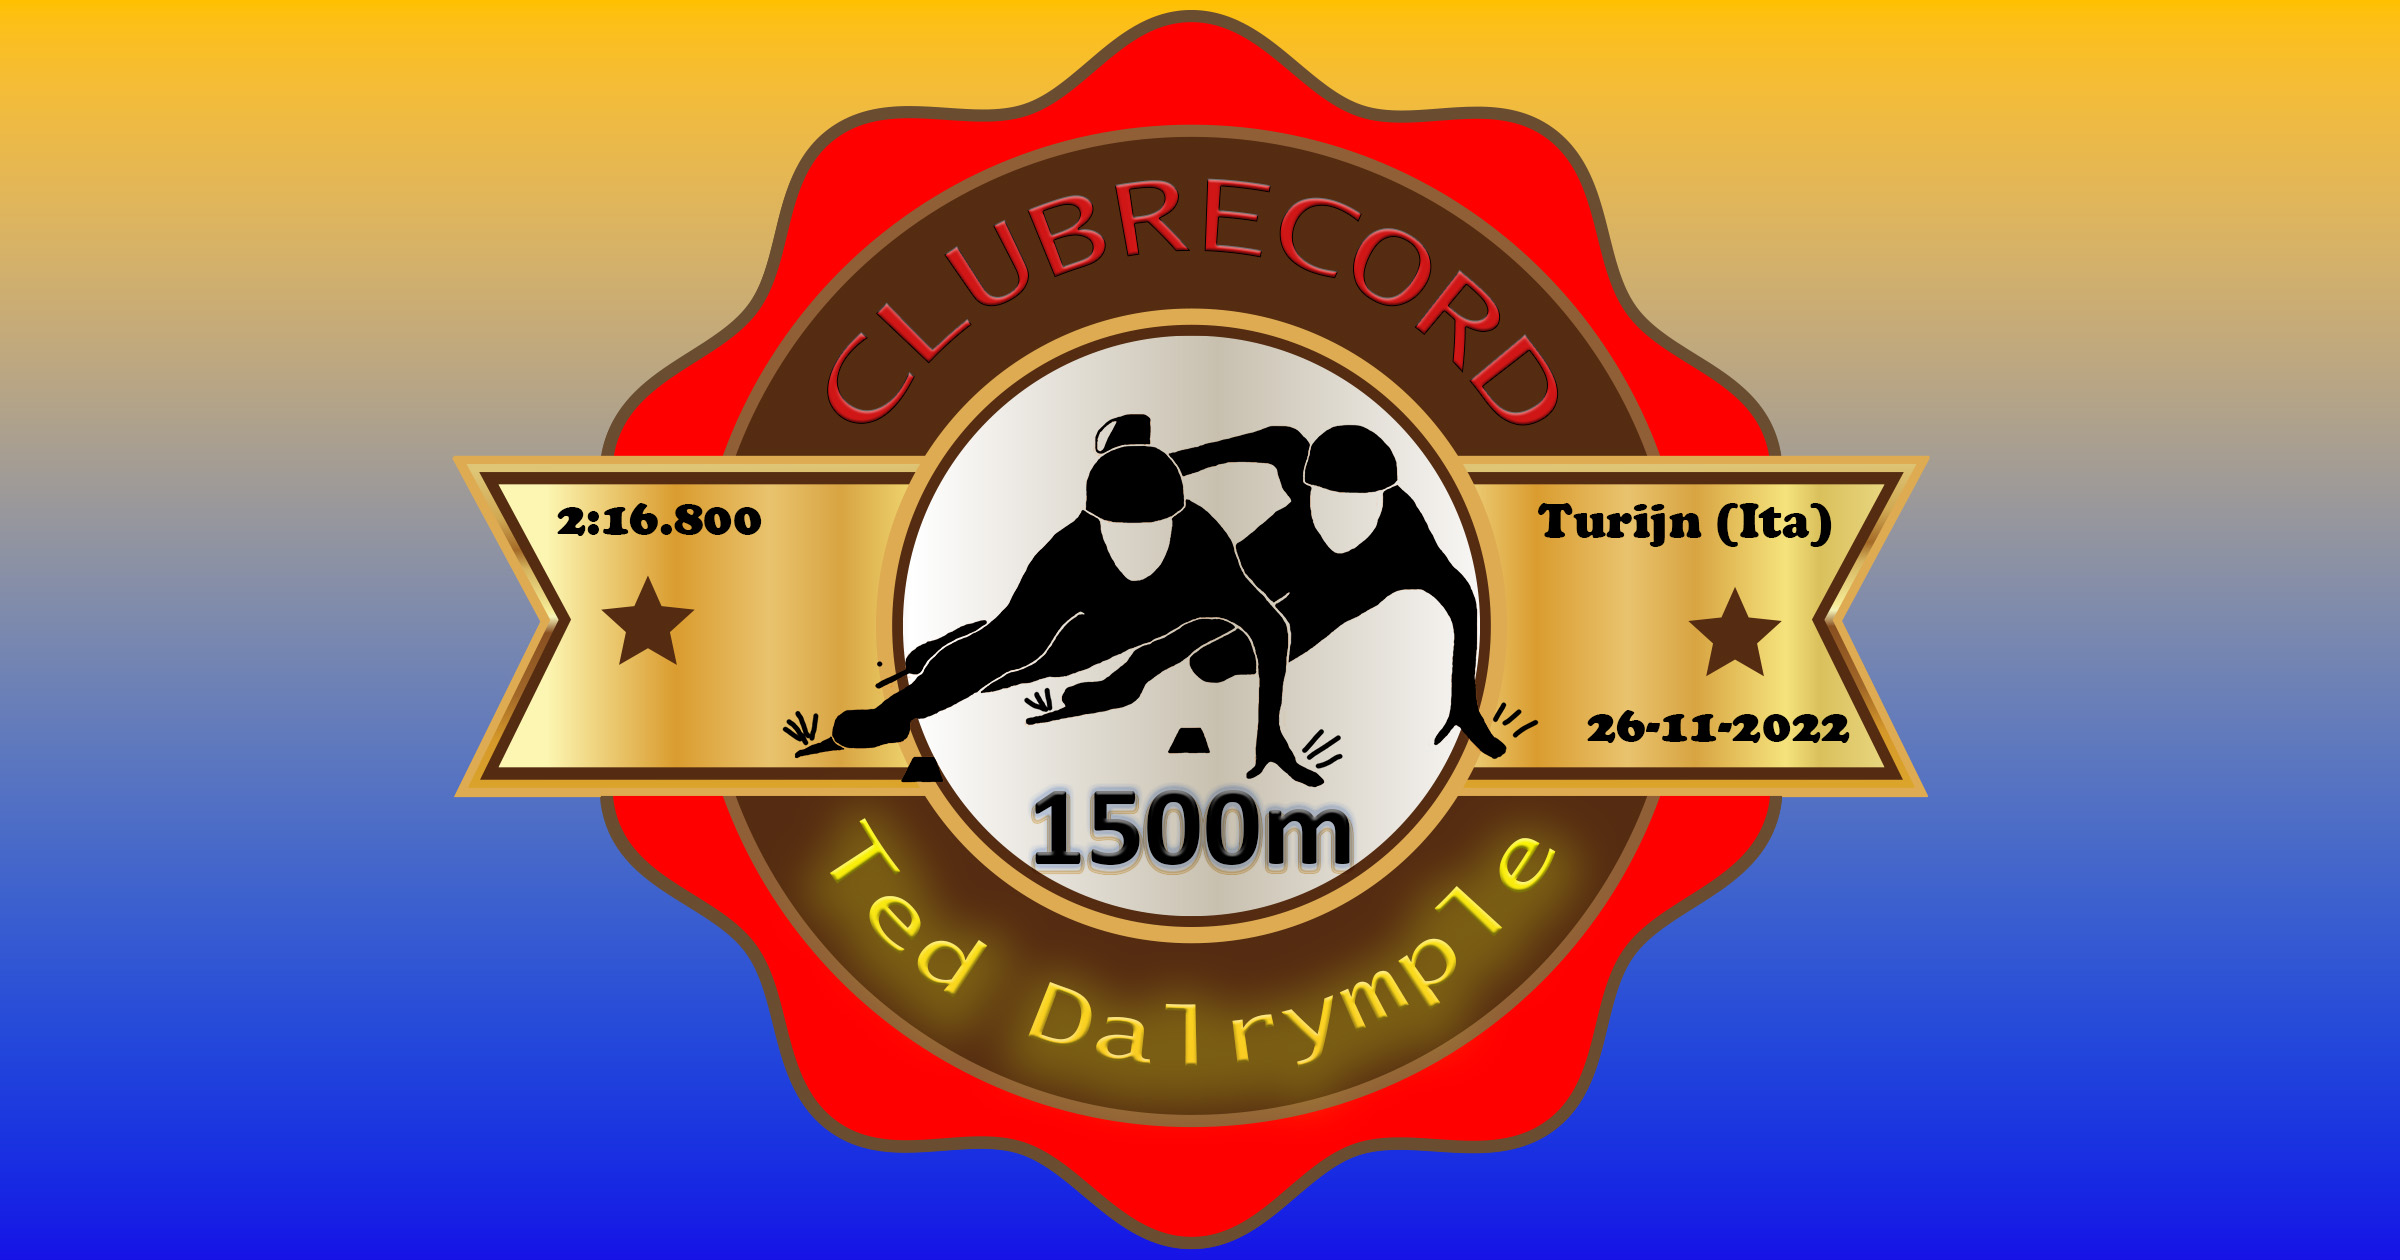 clubrecord 1500m Ted Dalrymple